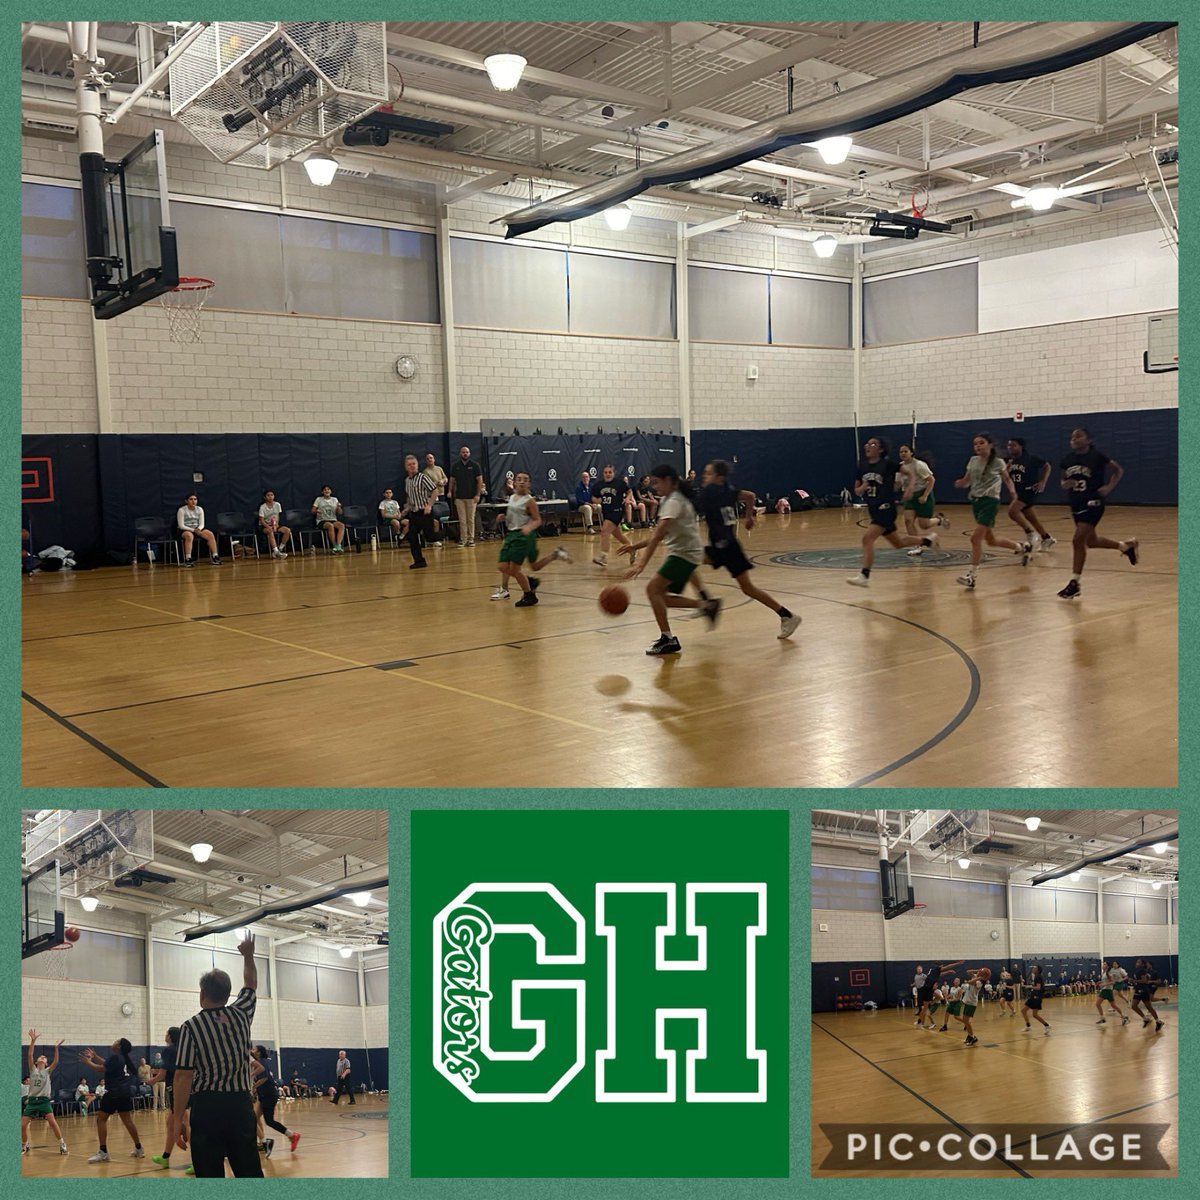 Busy week for our GHS musicians, singers and athletes! The GH beginner & advanced bands, fifth grade chorus & middle school band all performed… AND our boys & girls basketball teams played great games this week too!! Way to go Gators! 🎶🐊🙌🏻🏀📣@BristolCTSchool @GHillsGators